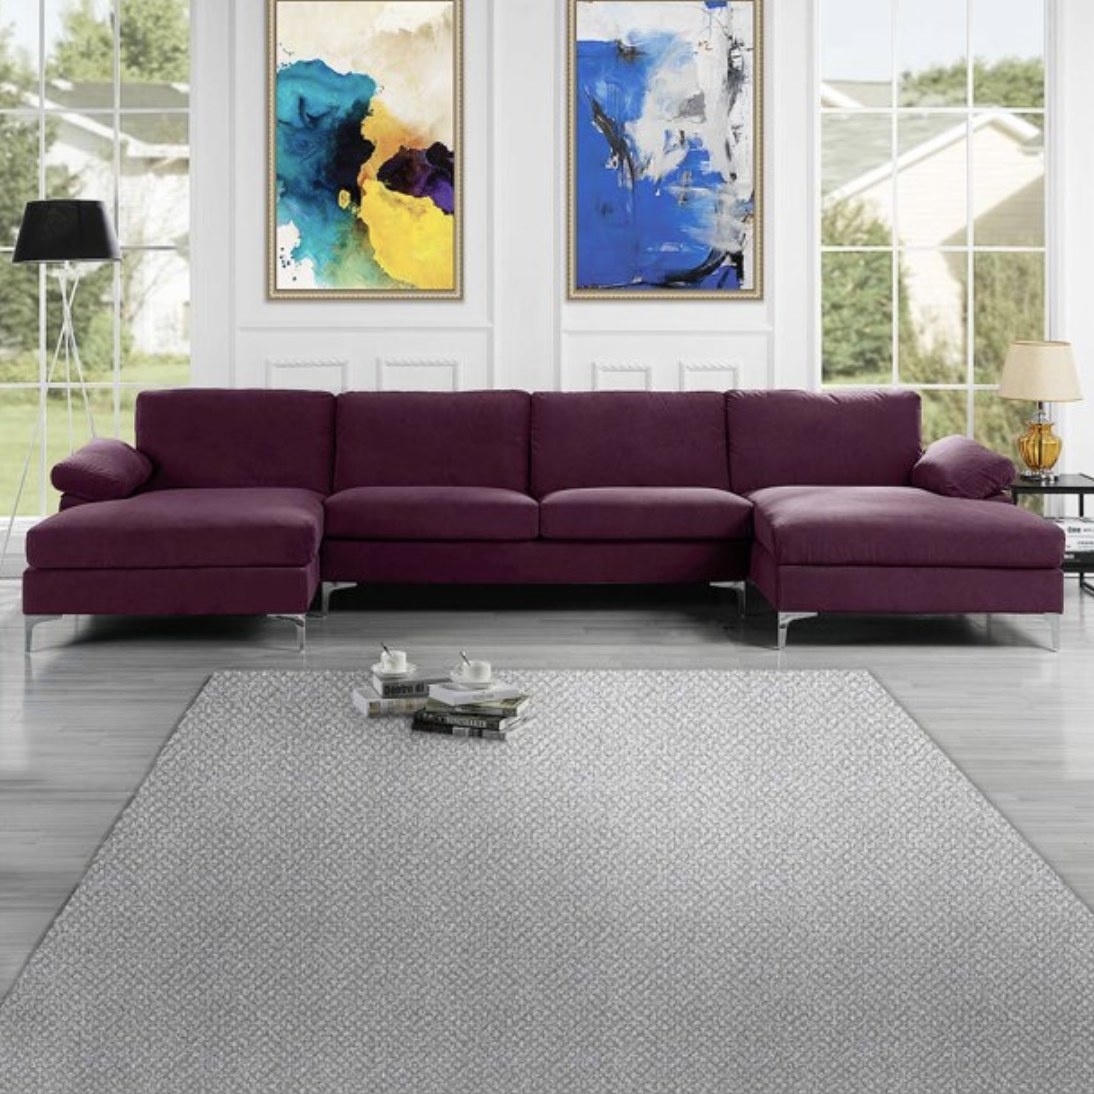 The extra-long purple couch